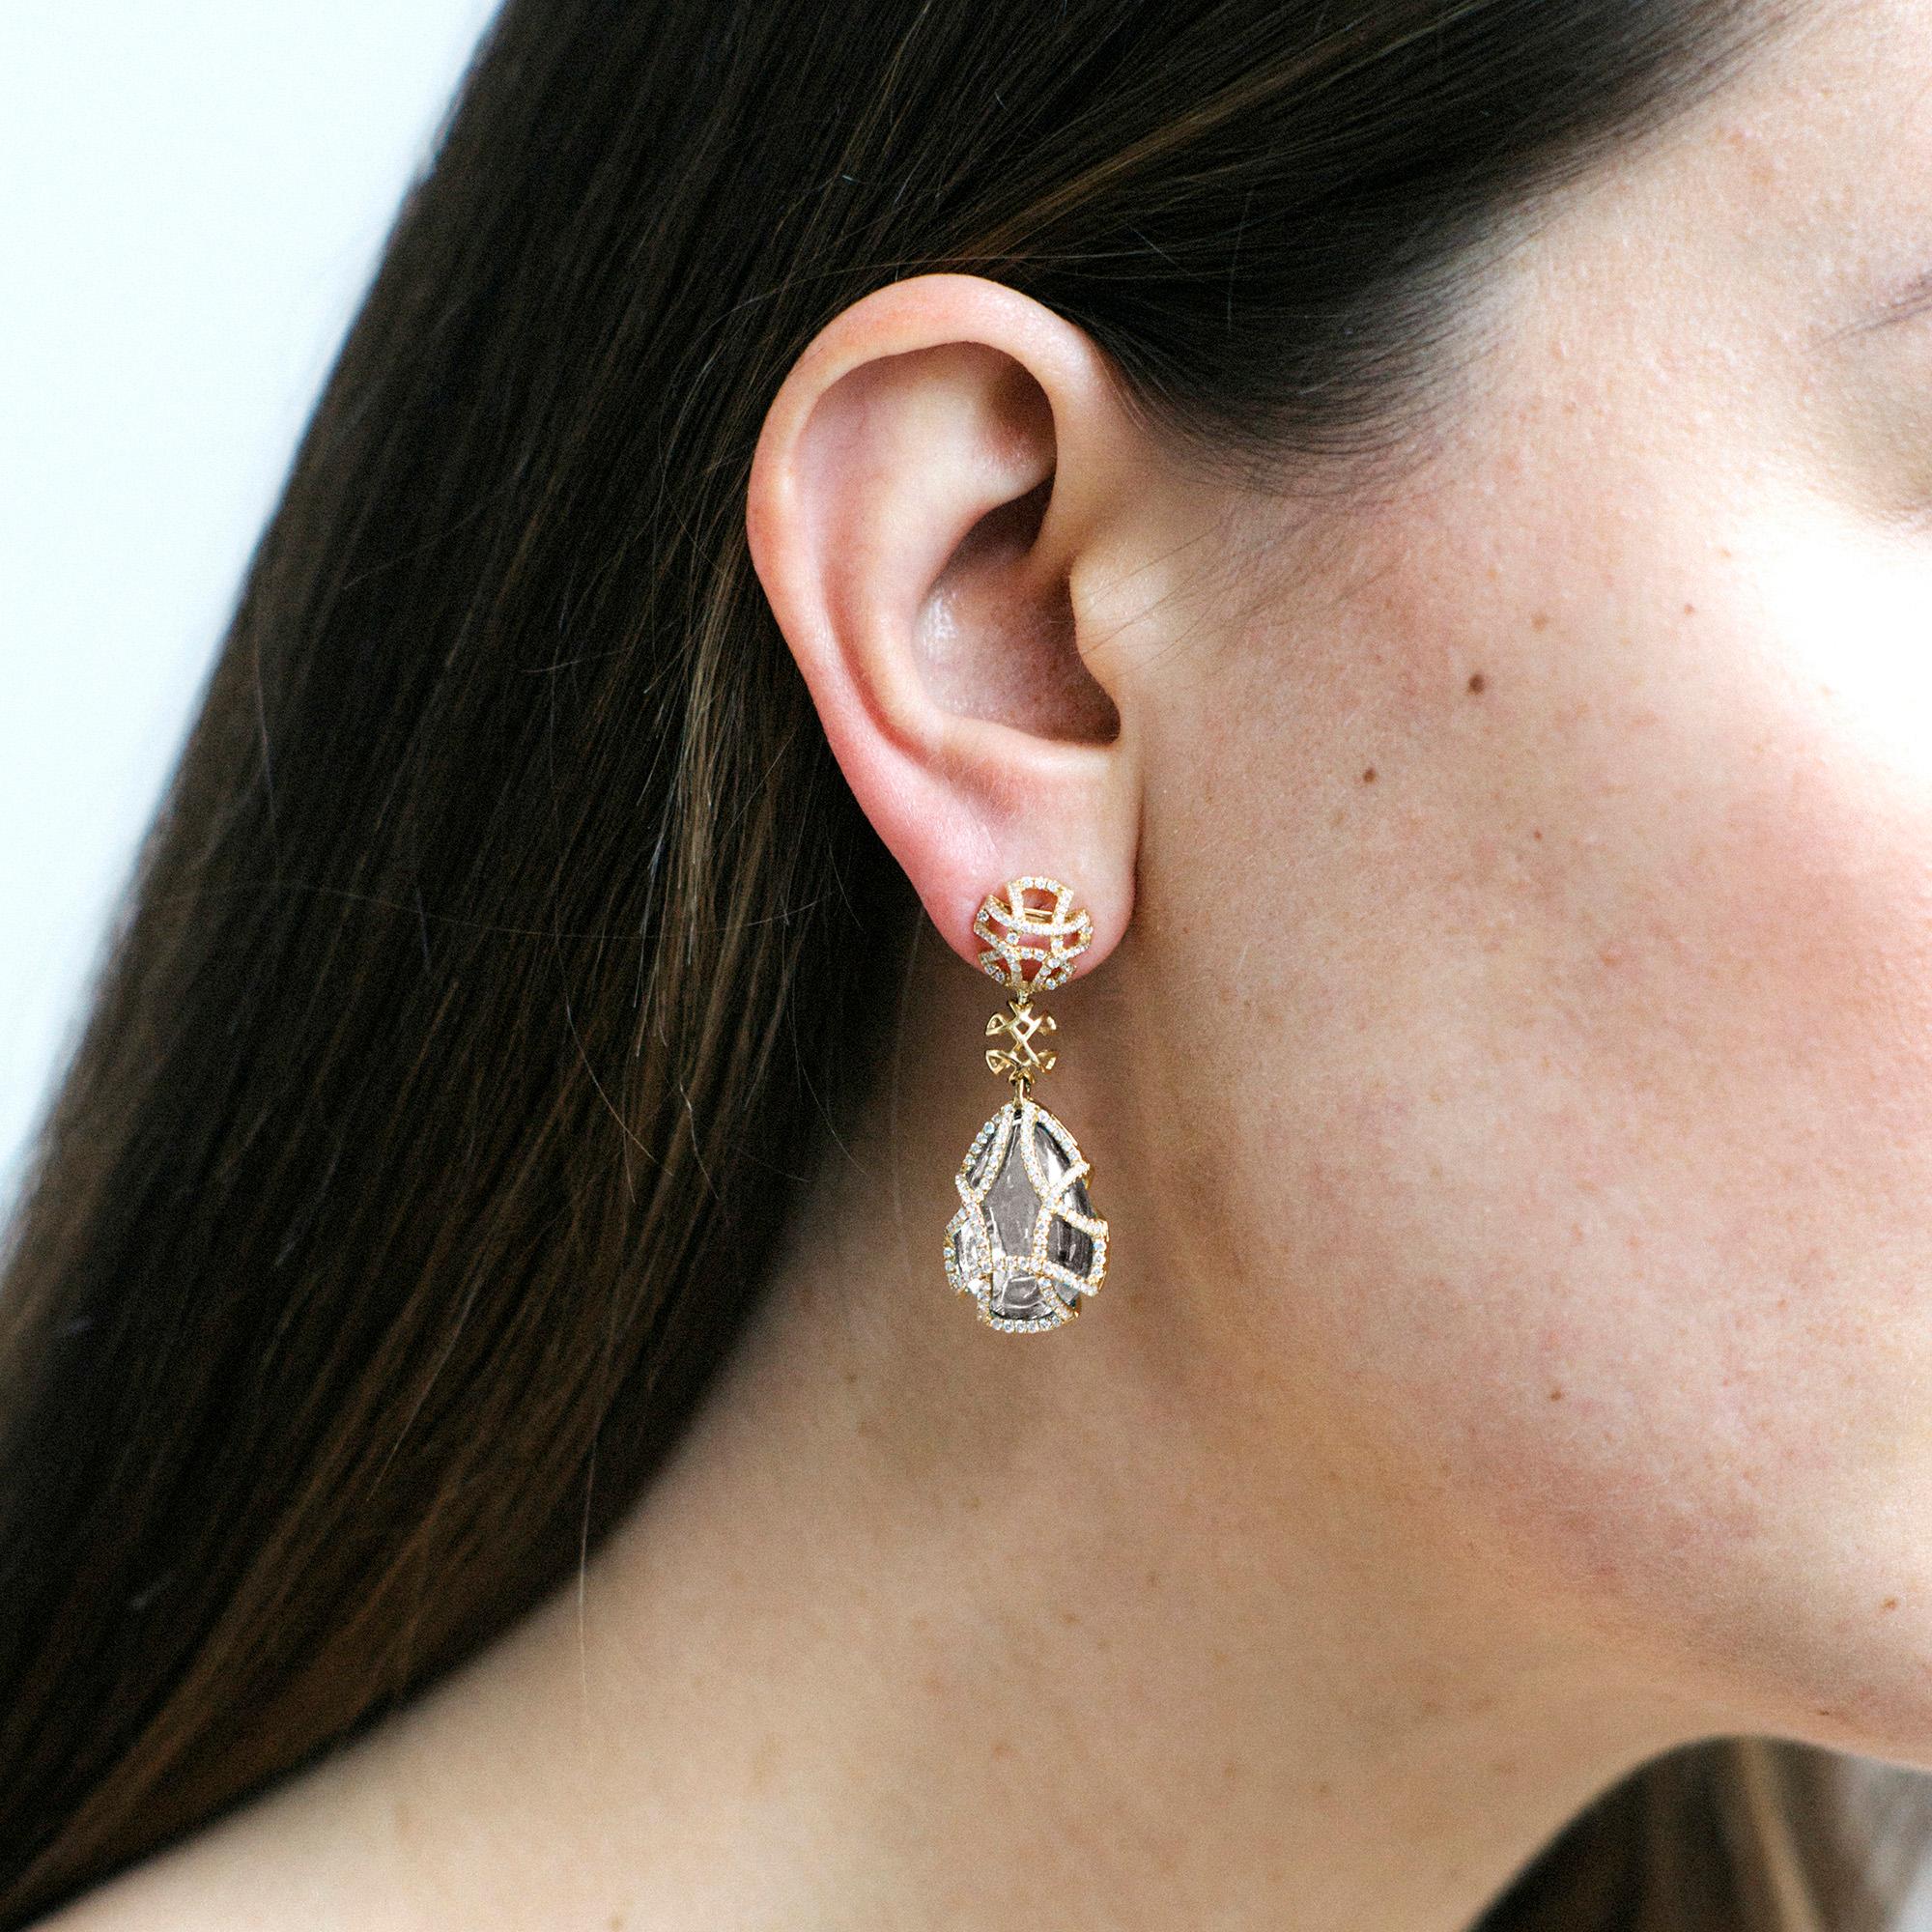 Rock Crystal Pear Shape Cage Earrings with Diamonds in 18K Yellow Gold, from 'Freedom